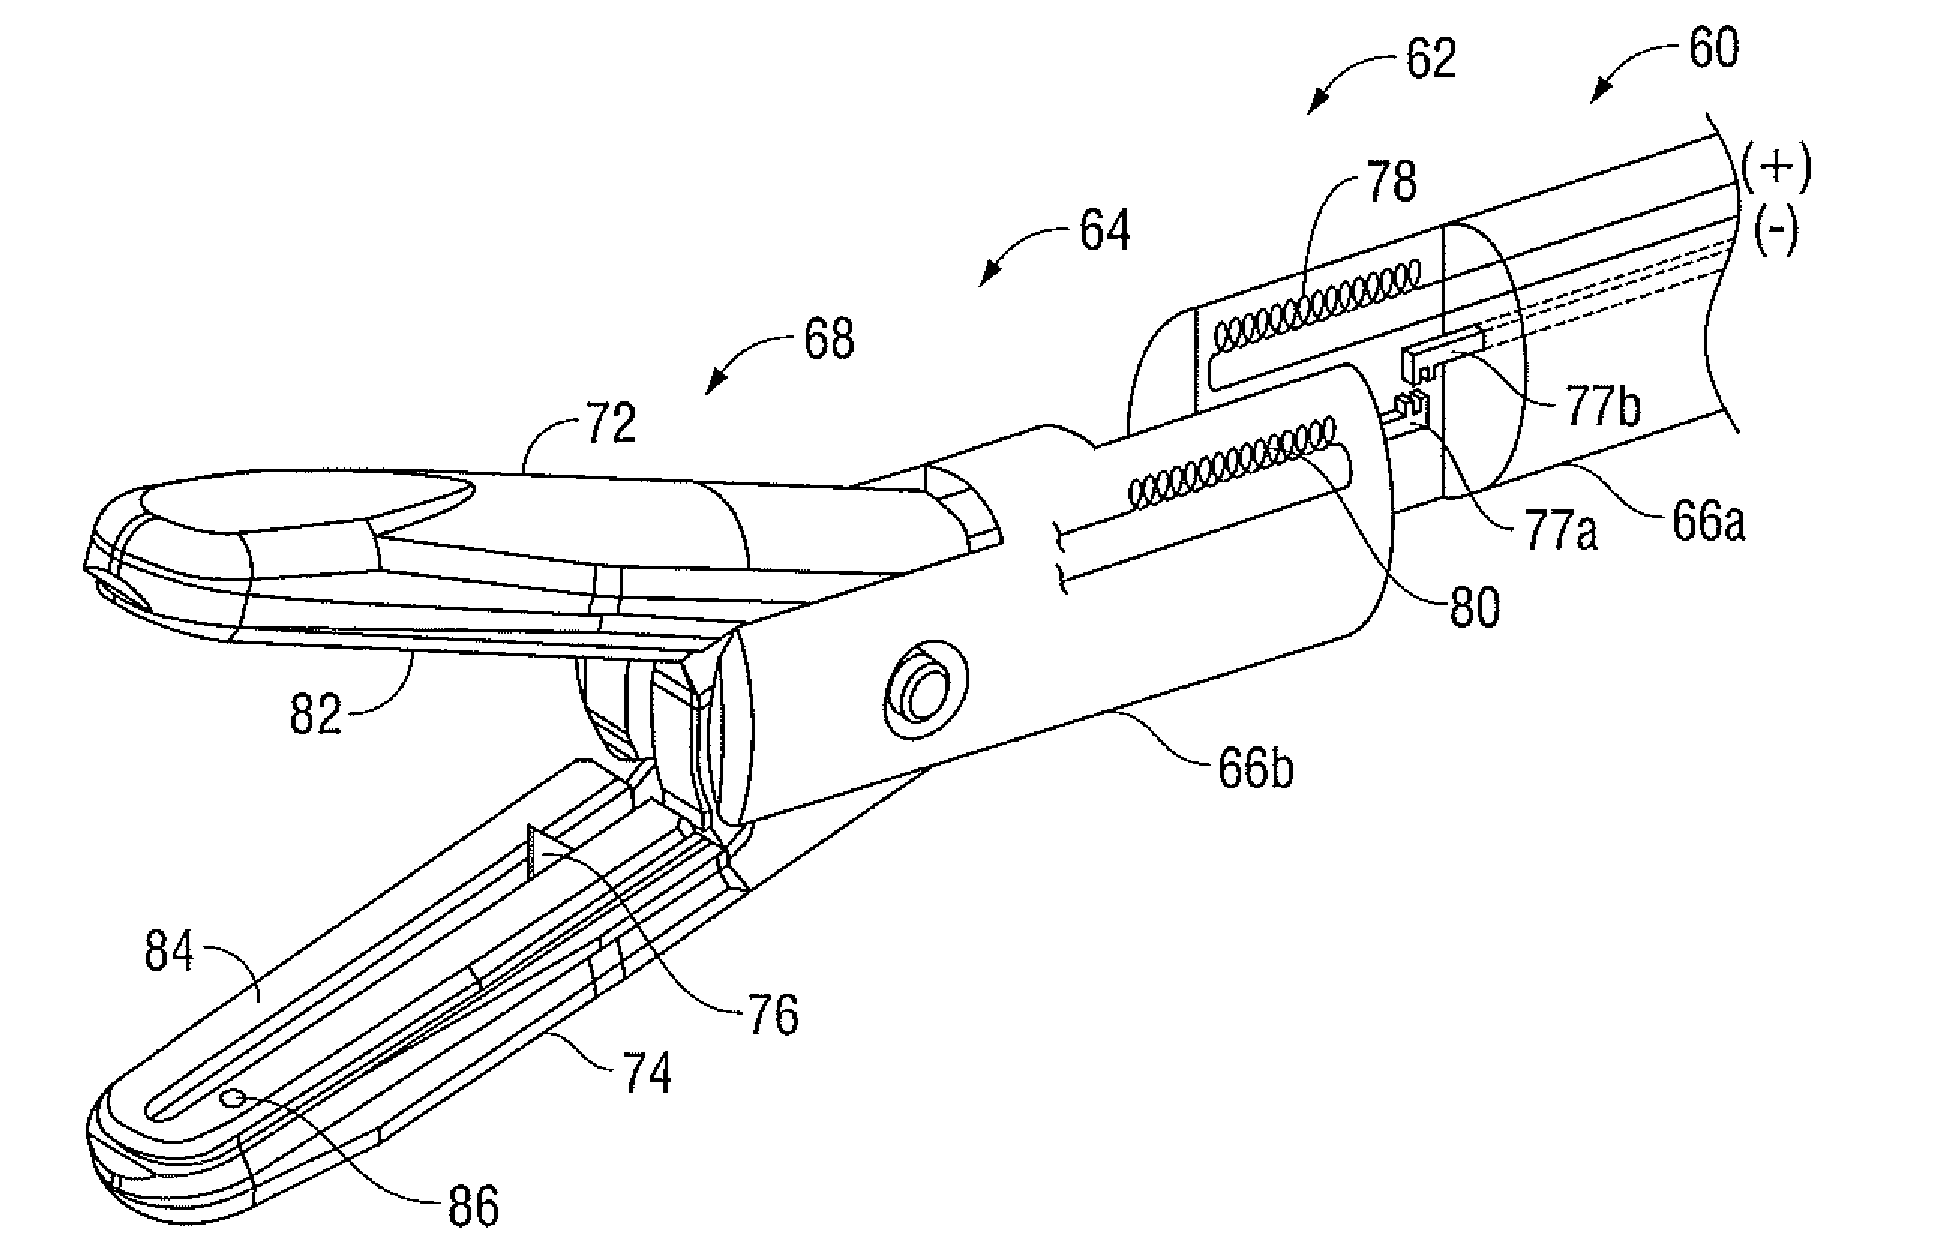 Surgical Instrument with Non-Contact Electrical Coupling